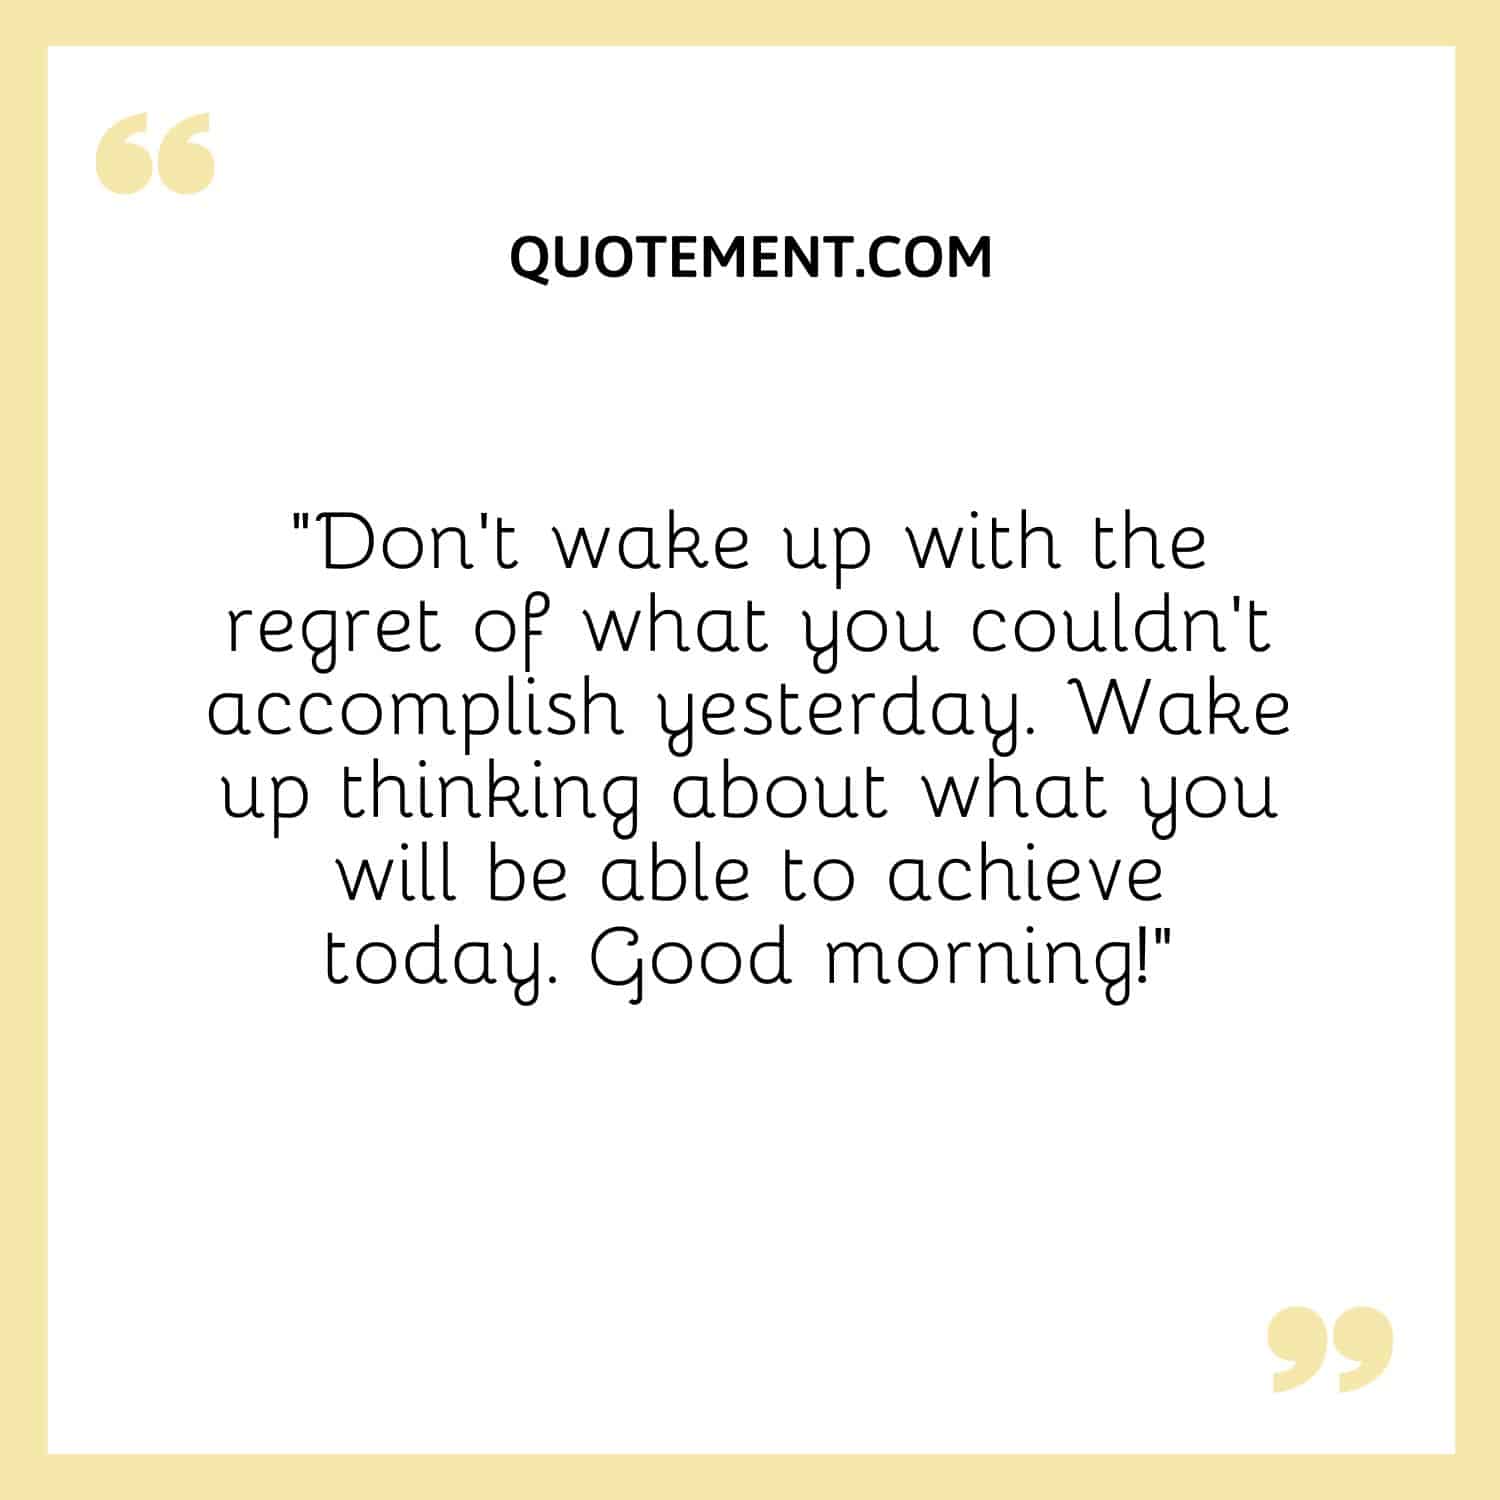 Don’t wake up with the regret of what you couldn’t accomplish yesterday